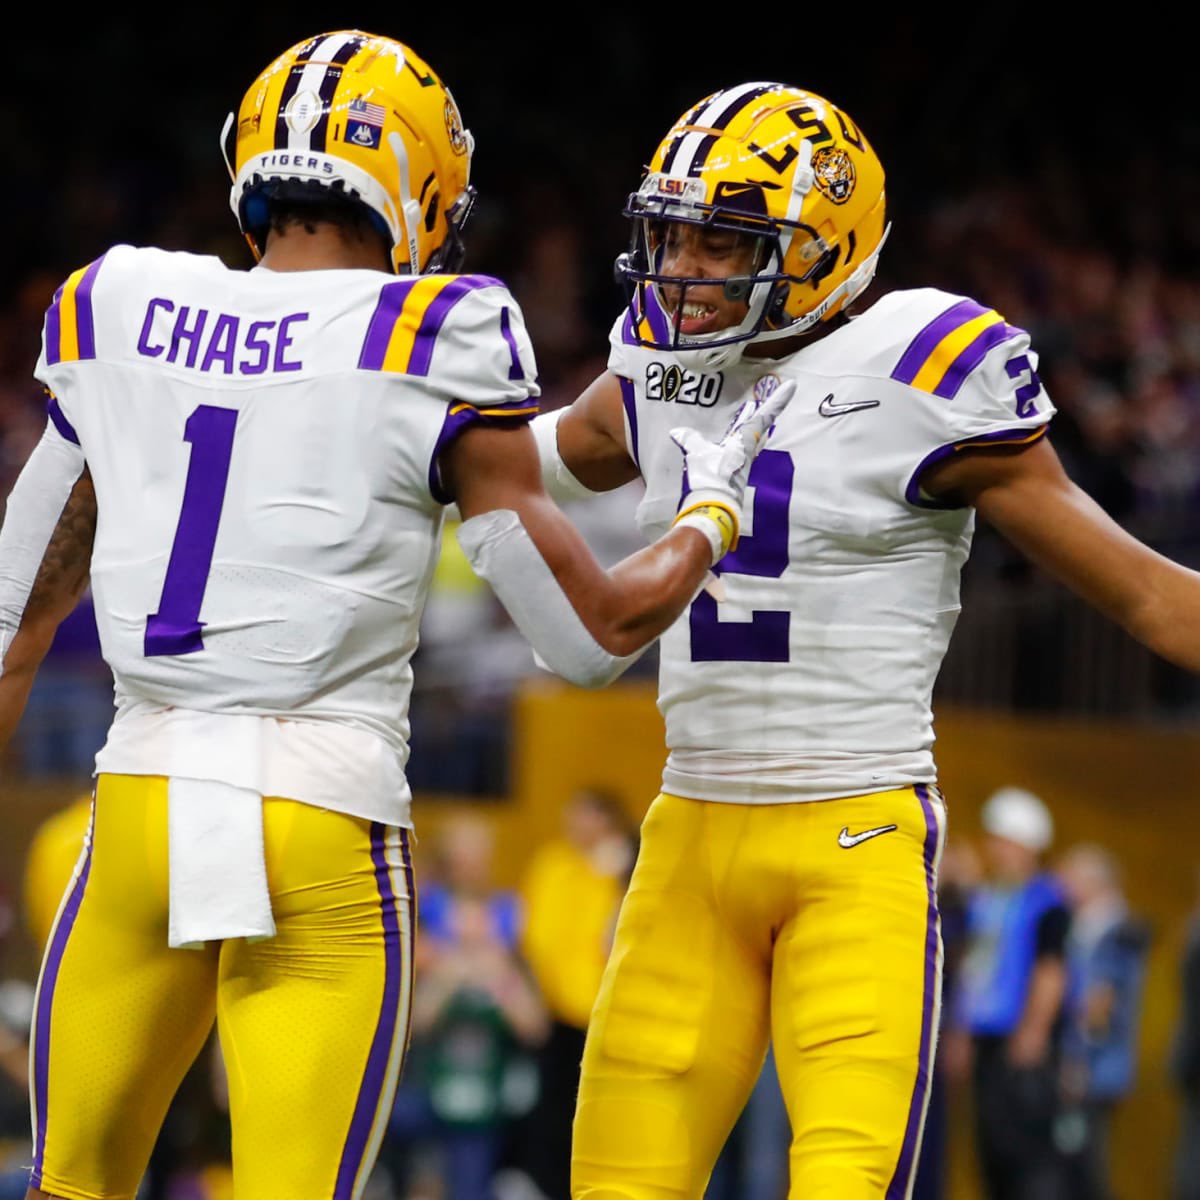 #AGTG After a great conversation with @Coach_Hankton I’m BLESSED to say I have Received an OFFER from Louisiana State University!!💜💛 @LSUFBrecruiting @LSUfootball @clintsurratt @CoachJaredCate @4_Strong @eron_sauls @BHoward_11 @BillyEmbody @MikeRoach247 @EJHollandOn3